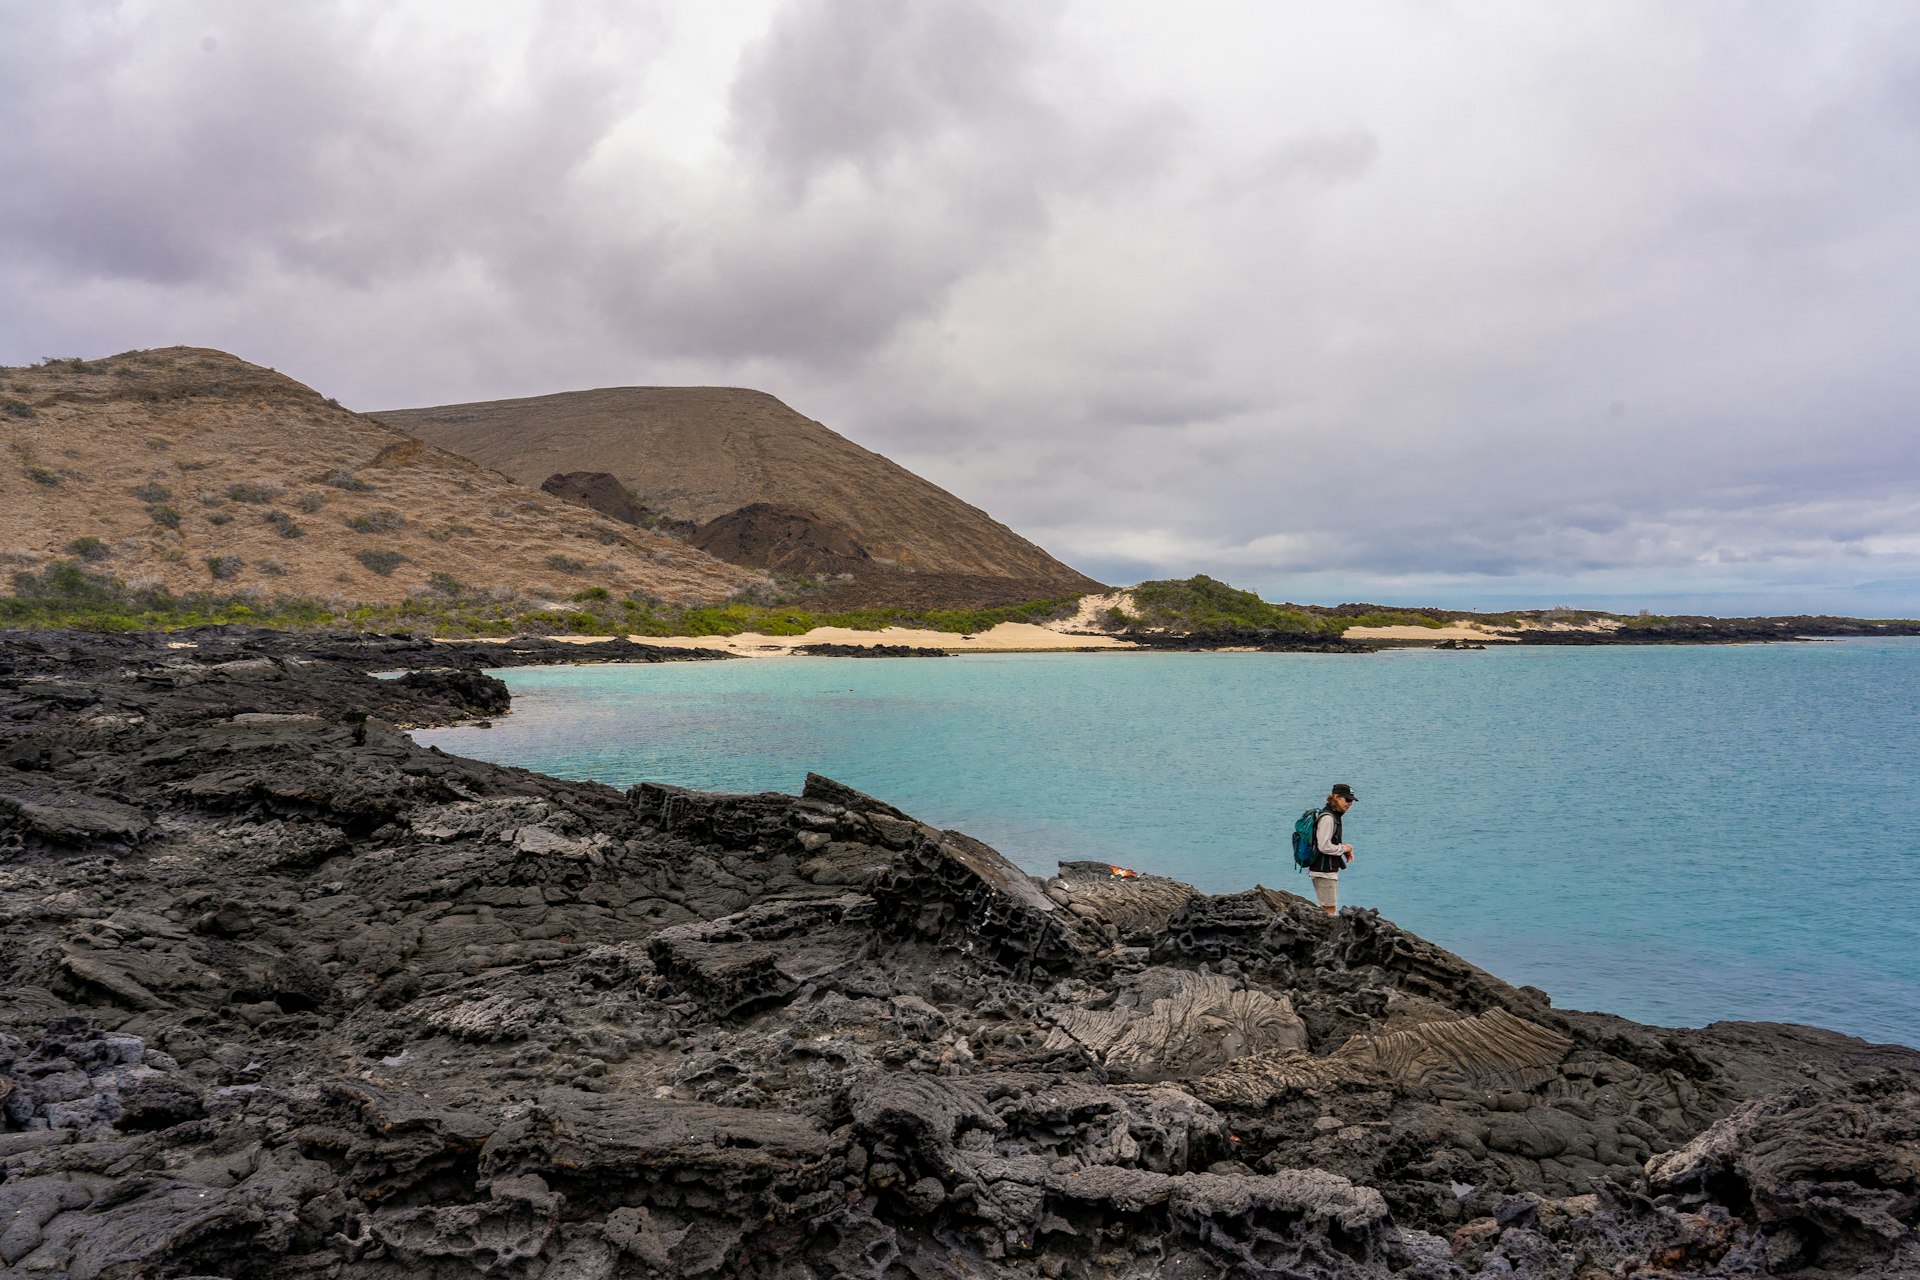 Person standing on a rocky island looking out at the water in the Galapagos Islands